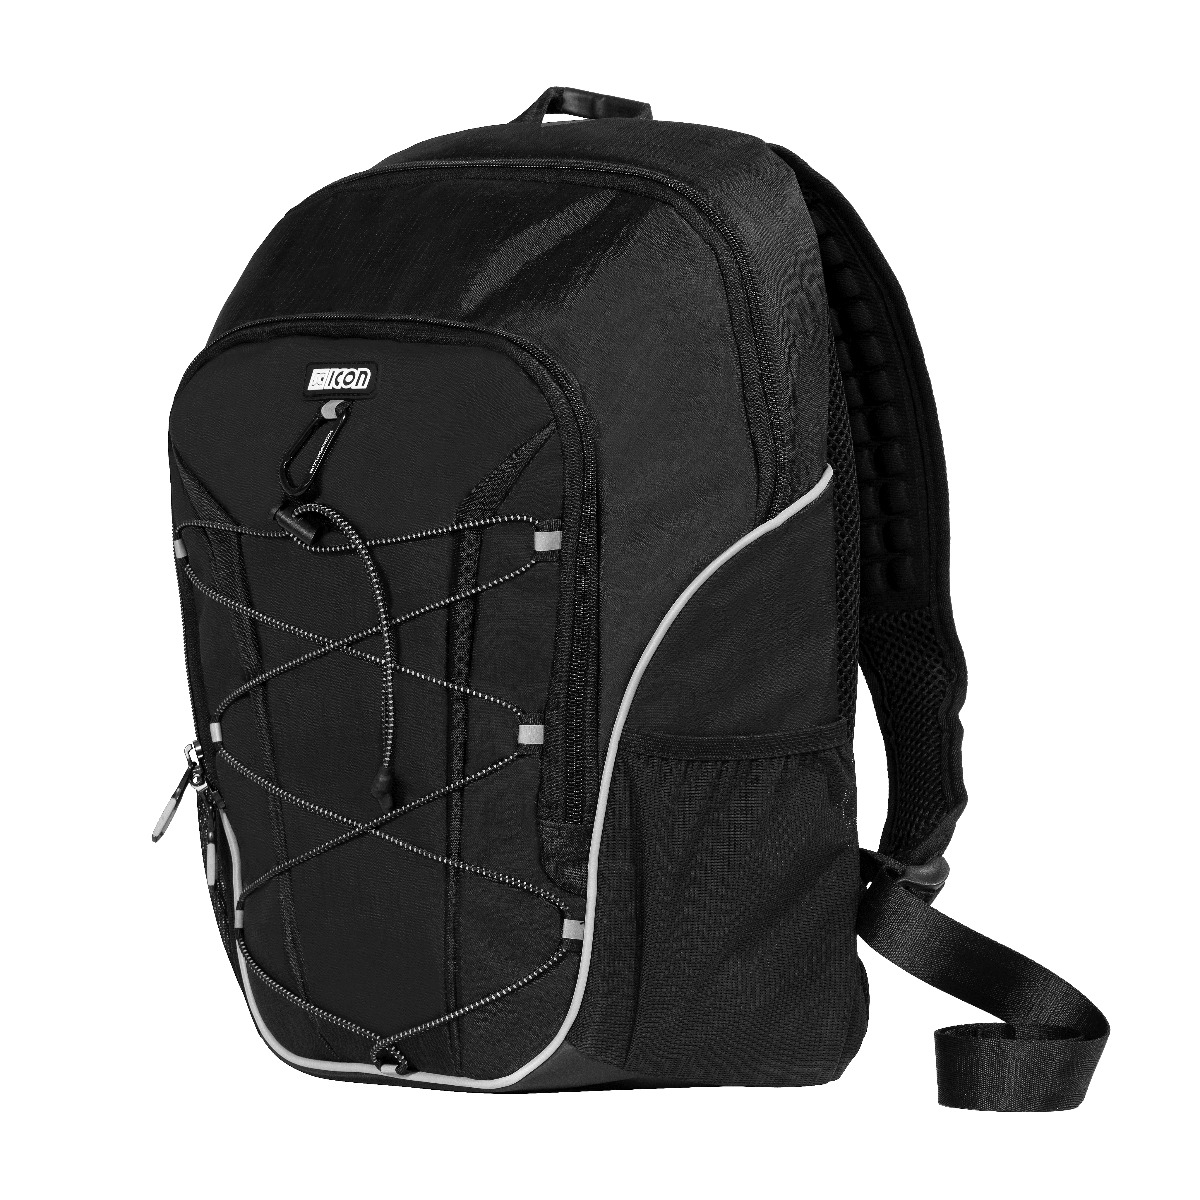 SHOP| Scicon Sport Backpack 25L on Sciconsports.com - bike bags, travel ...